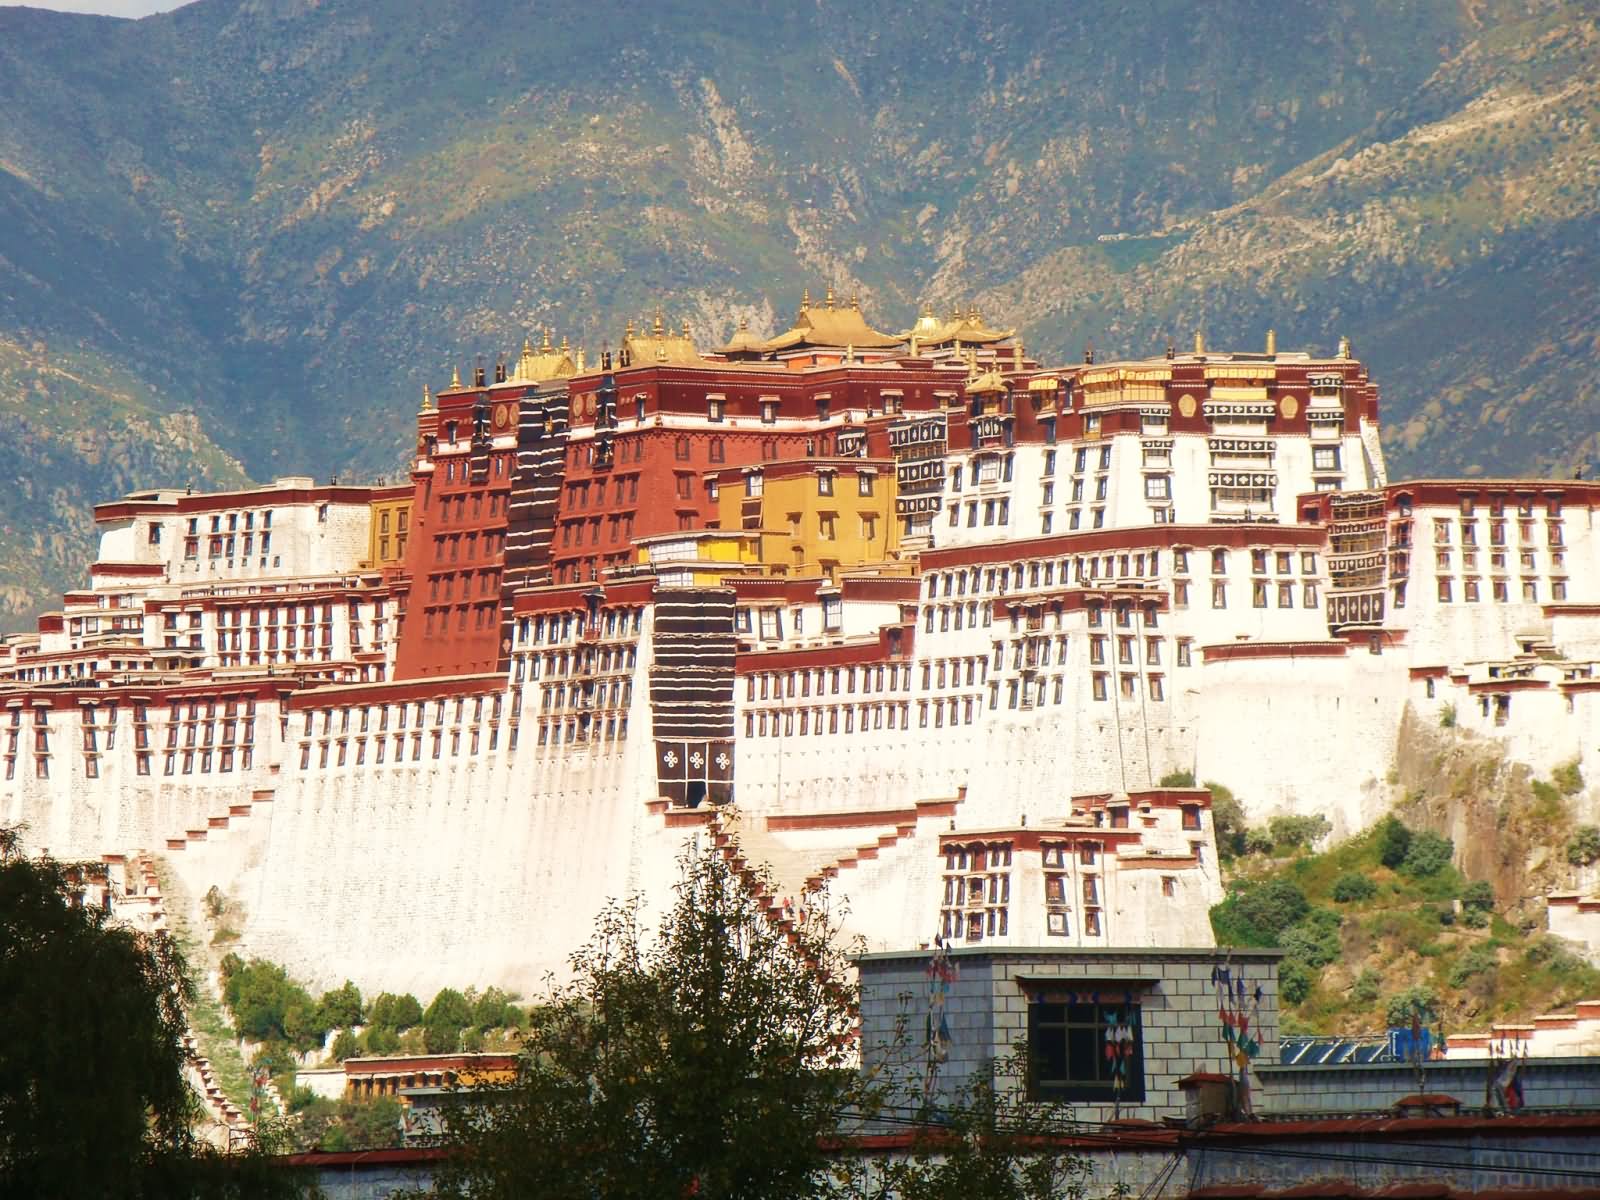 The Potala Palace View During Sunny Day